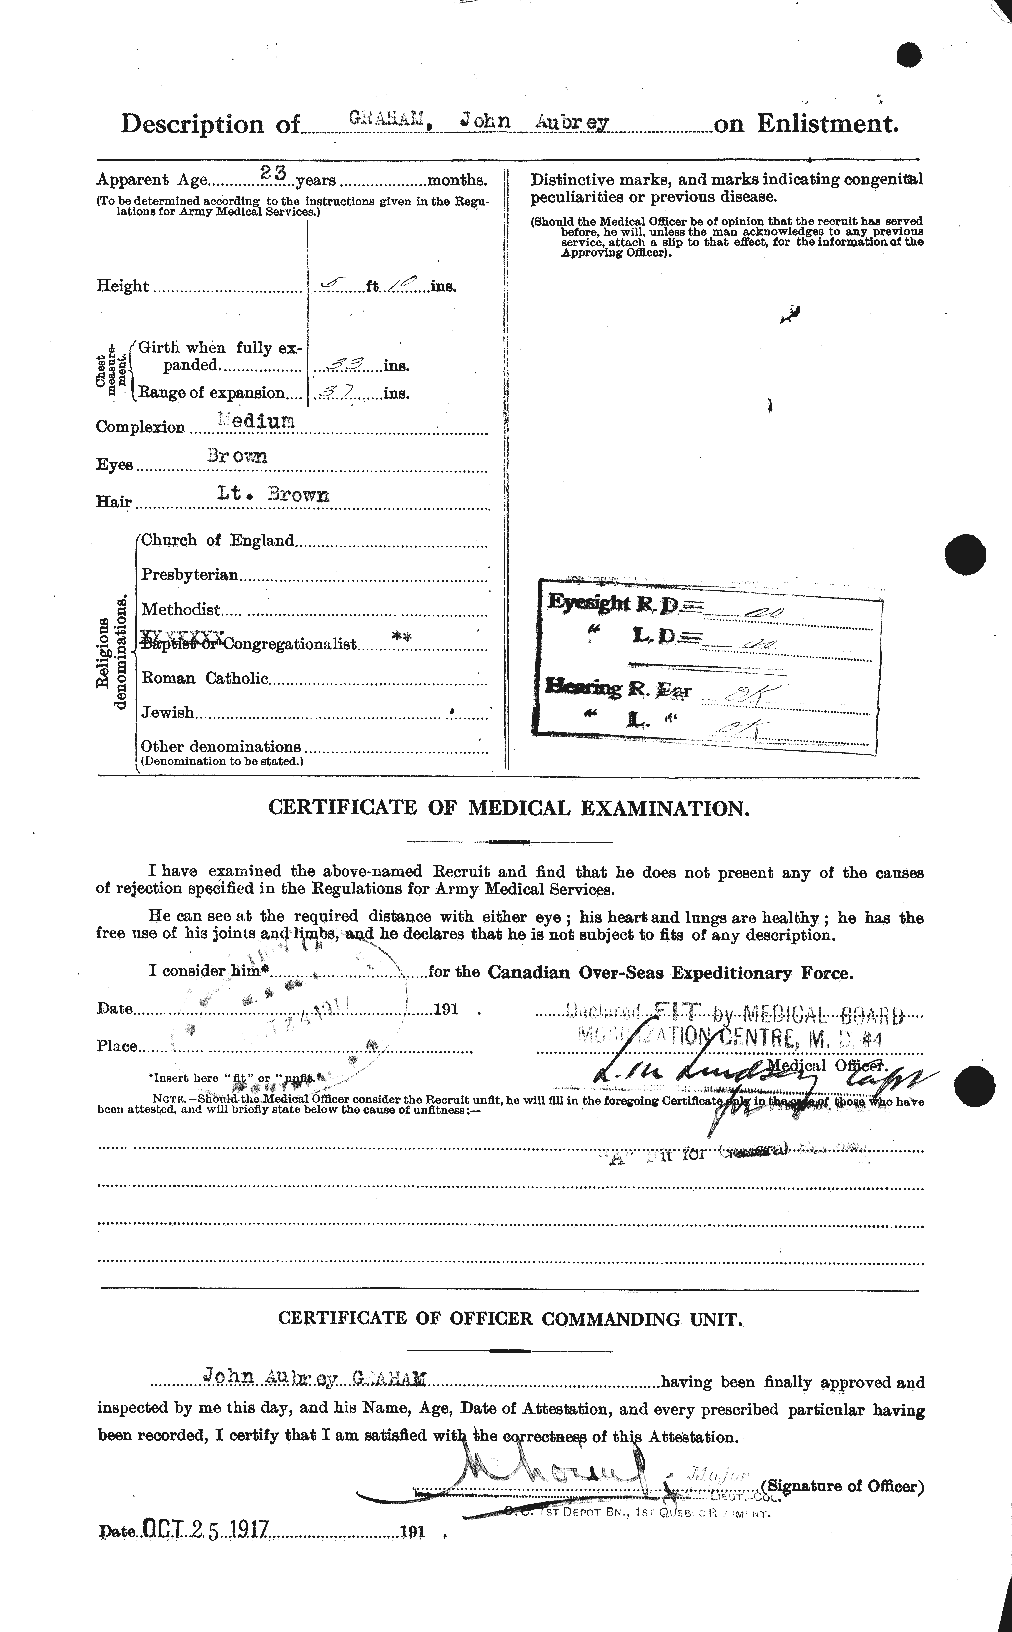 Personnel Records of the First World War - CEF 359156b